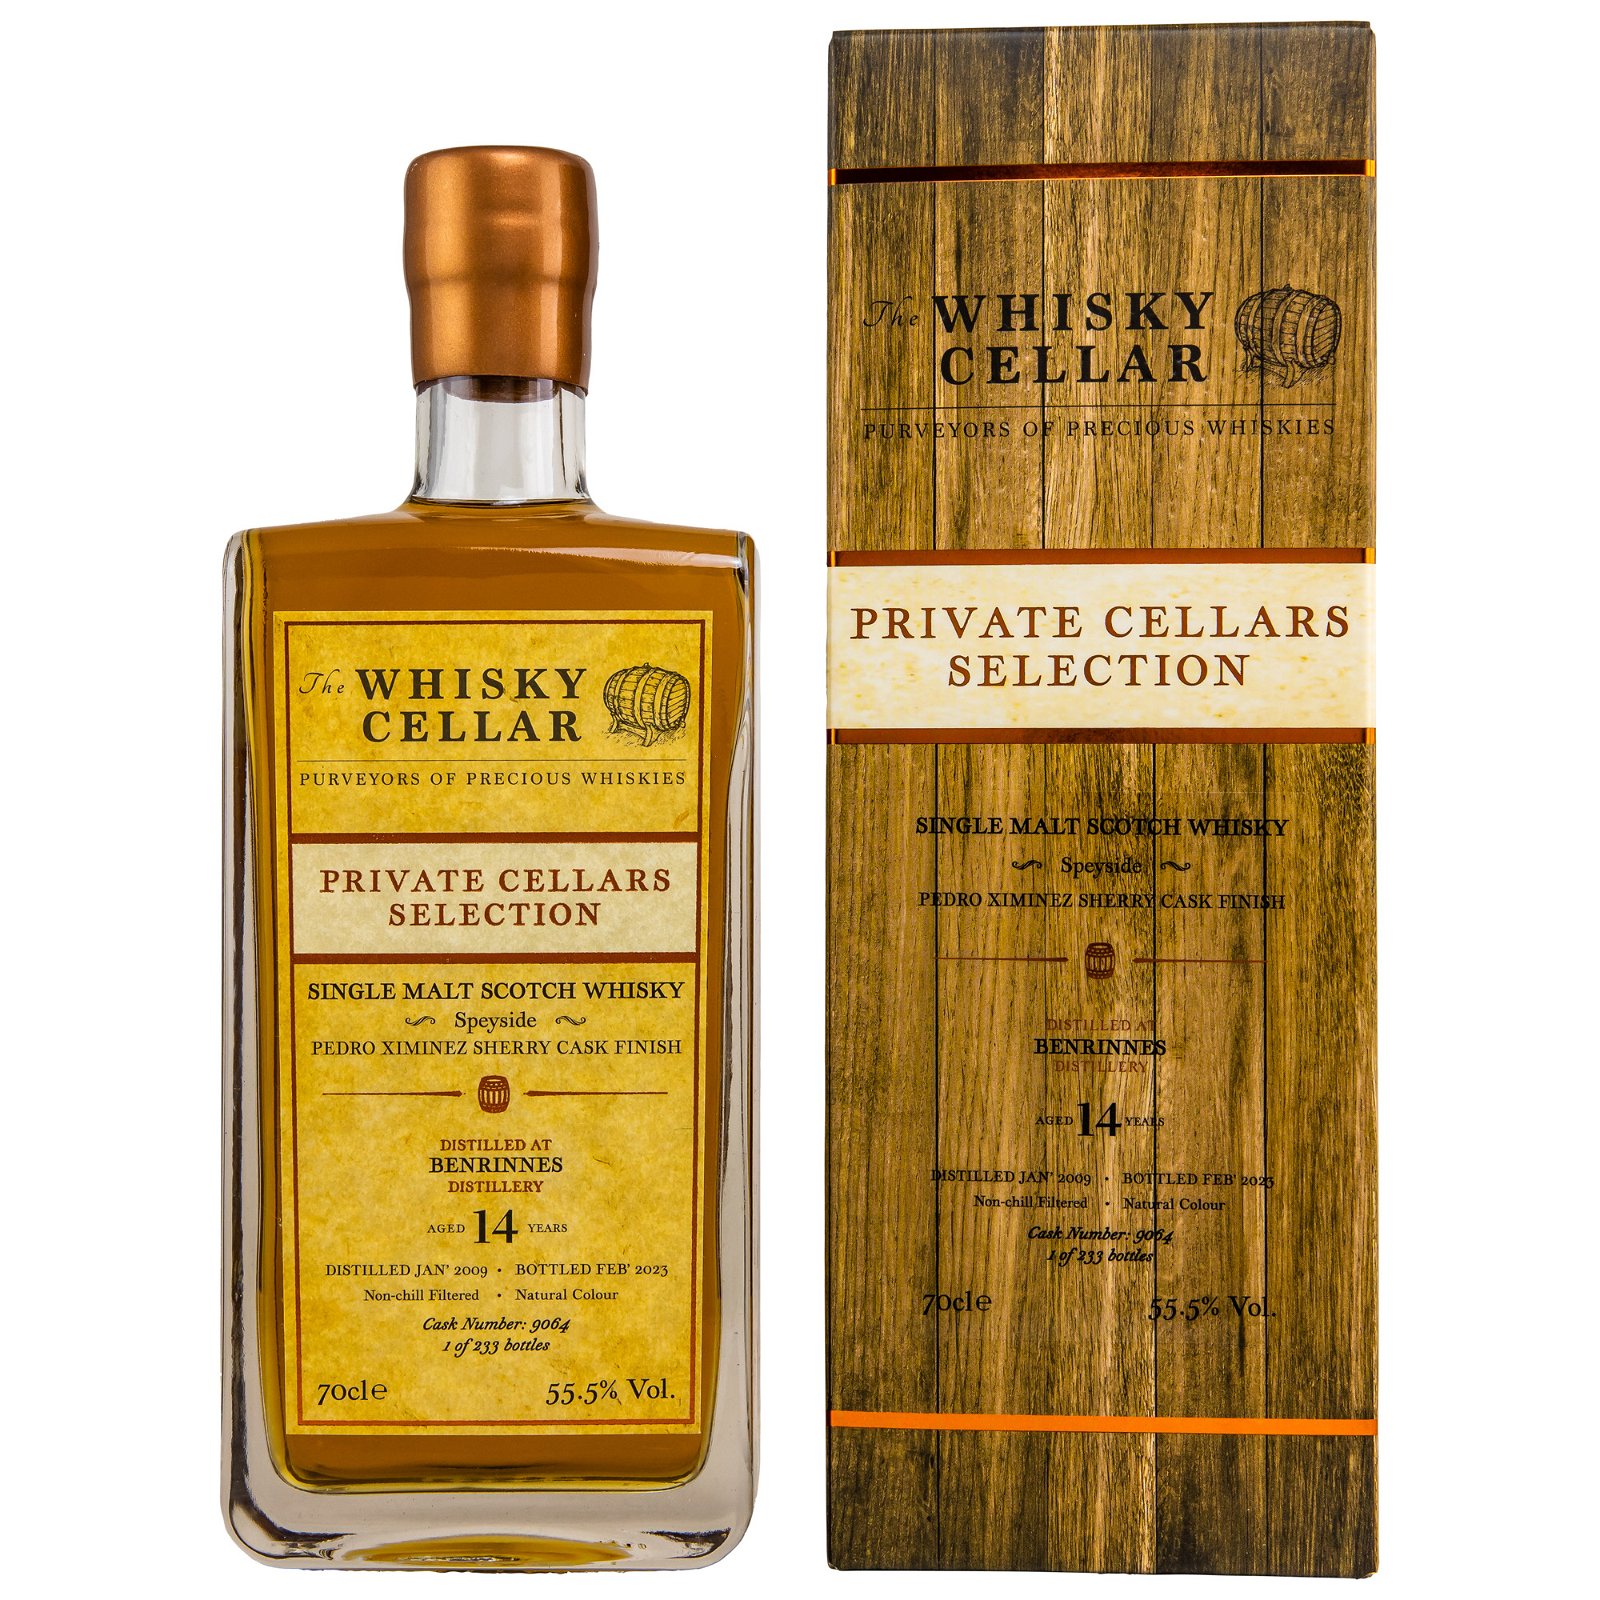 Benrinnes 2009/2023 - 14 Jahre PX Sherry Cask Finish No. 9064 Private Cellars Selection (The Whisky Cellar)